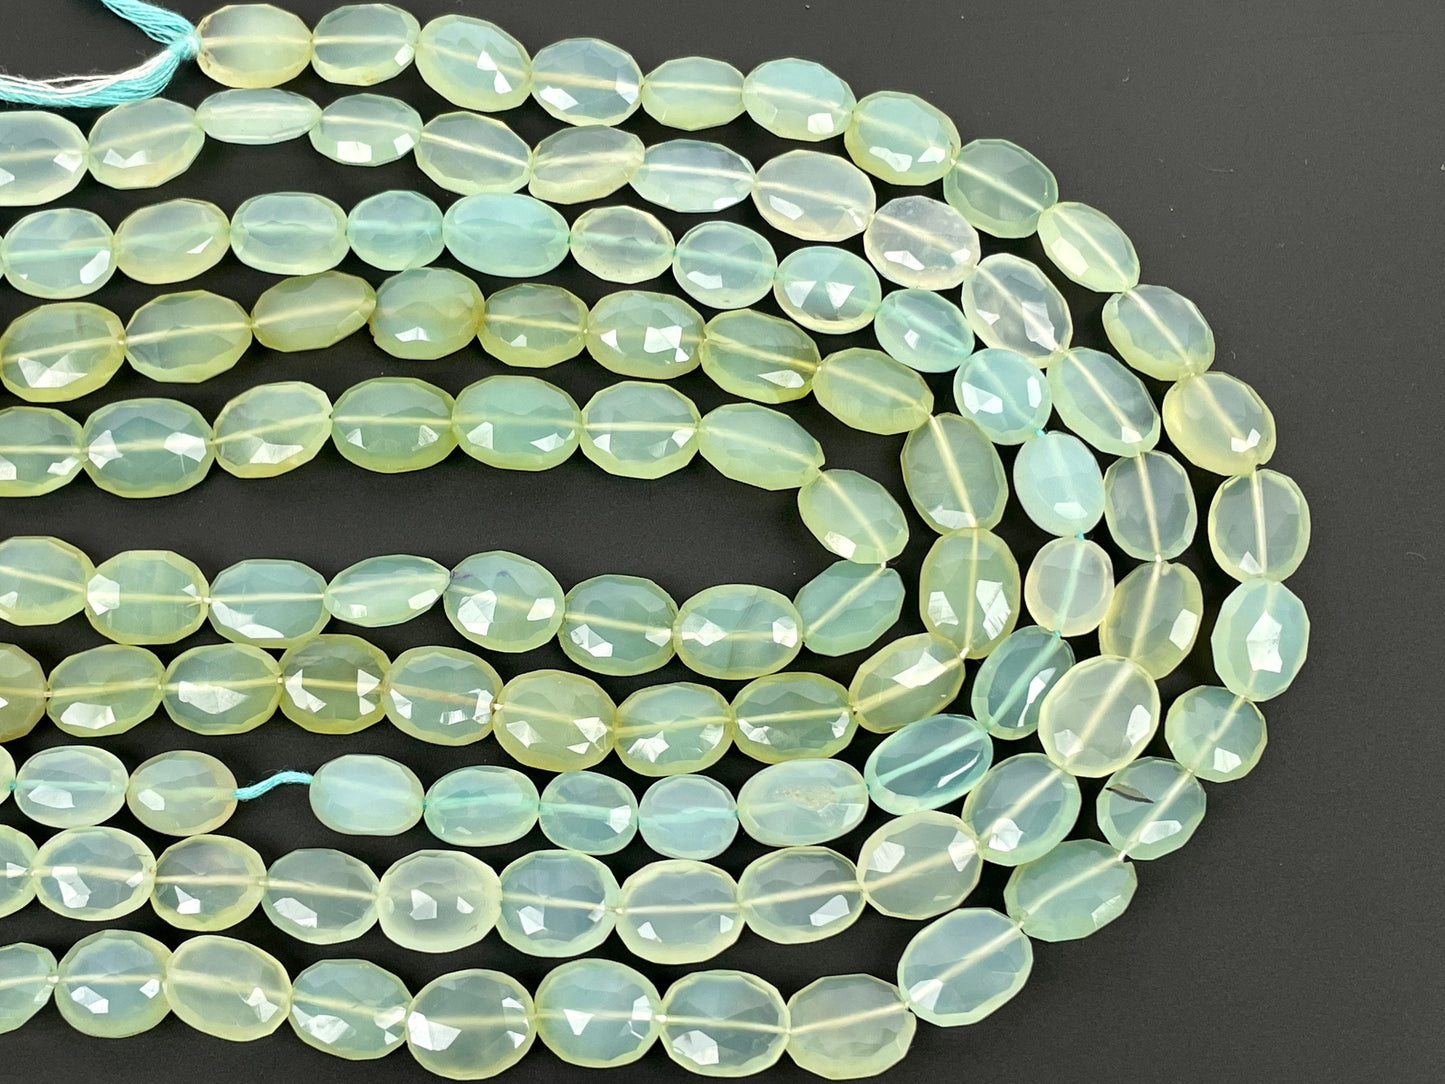 Natural Green Chalcedony Faceted Oval Beads